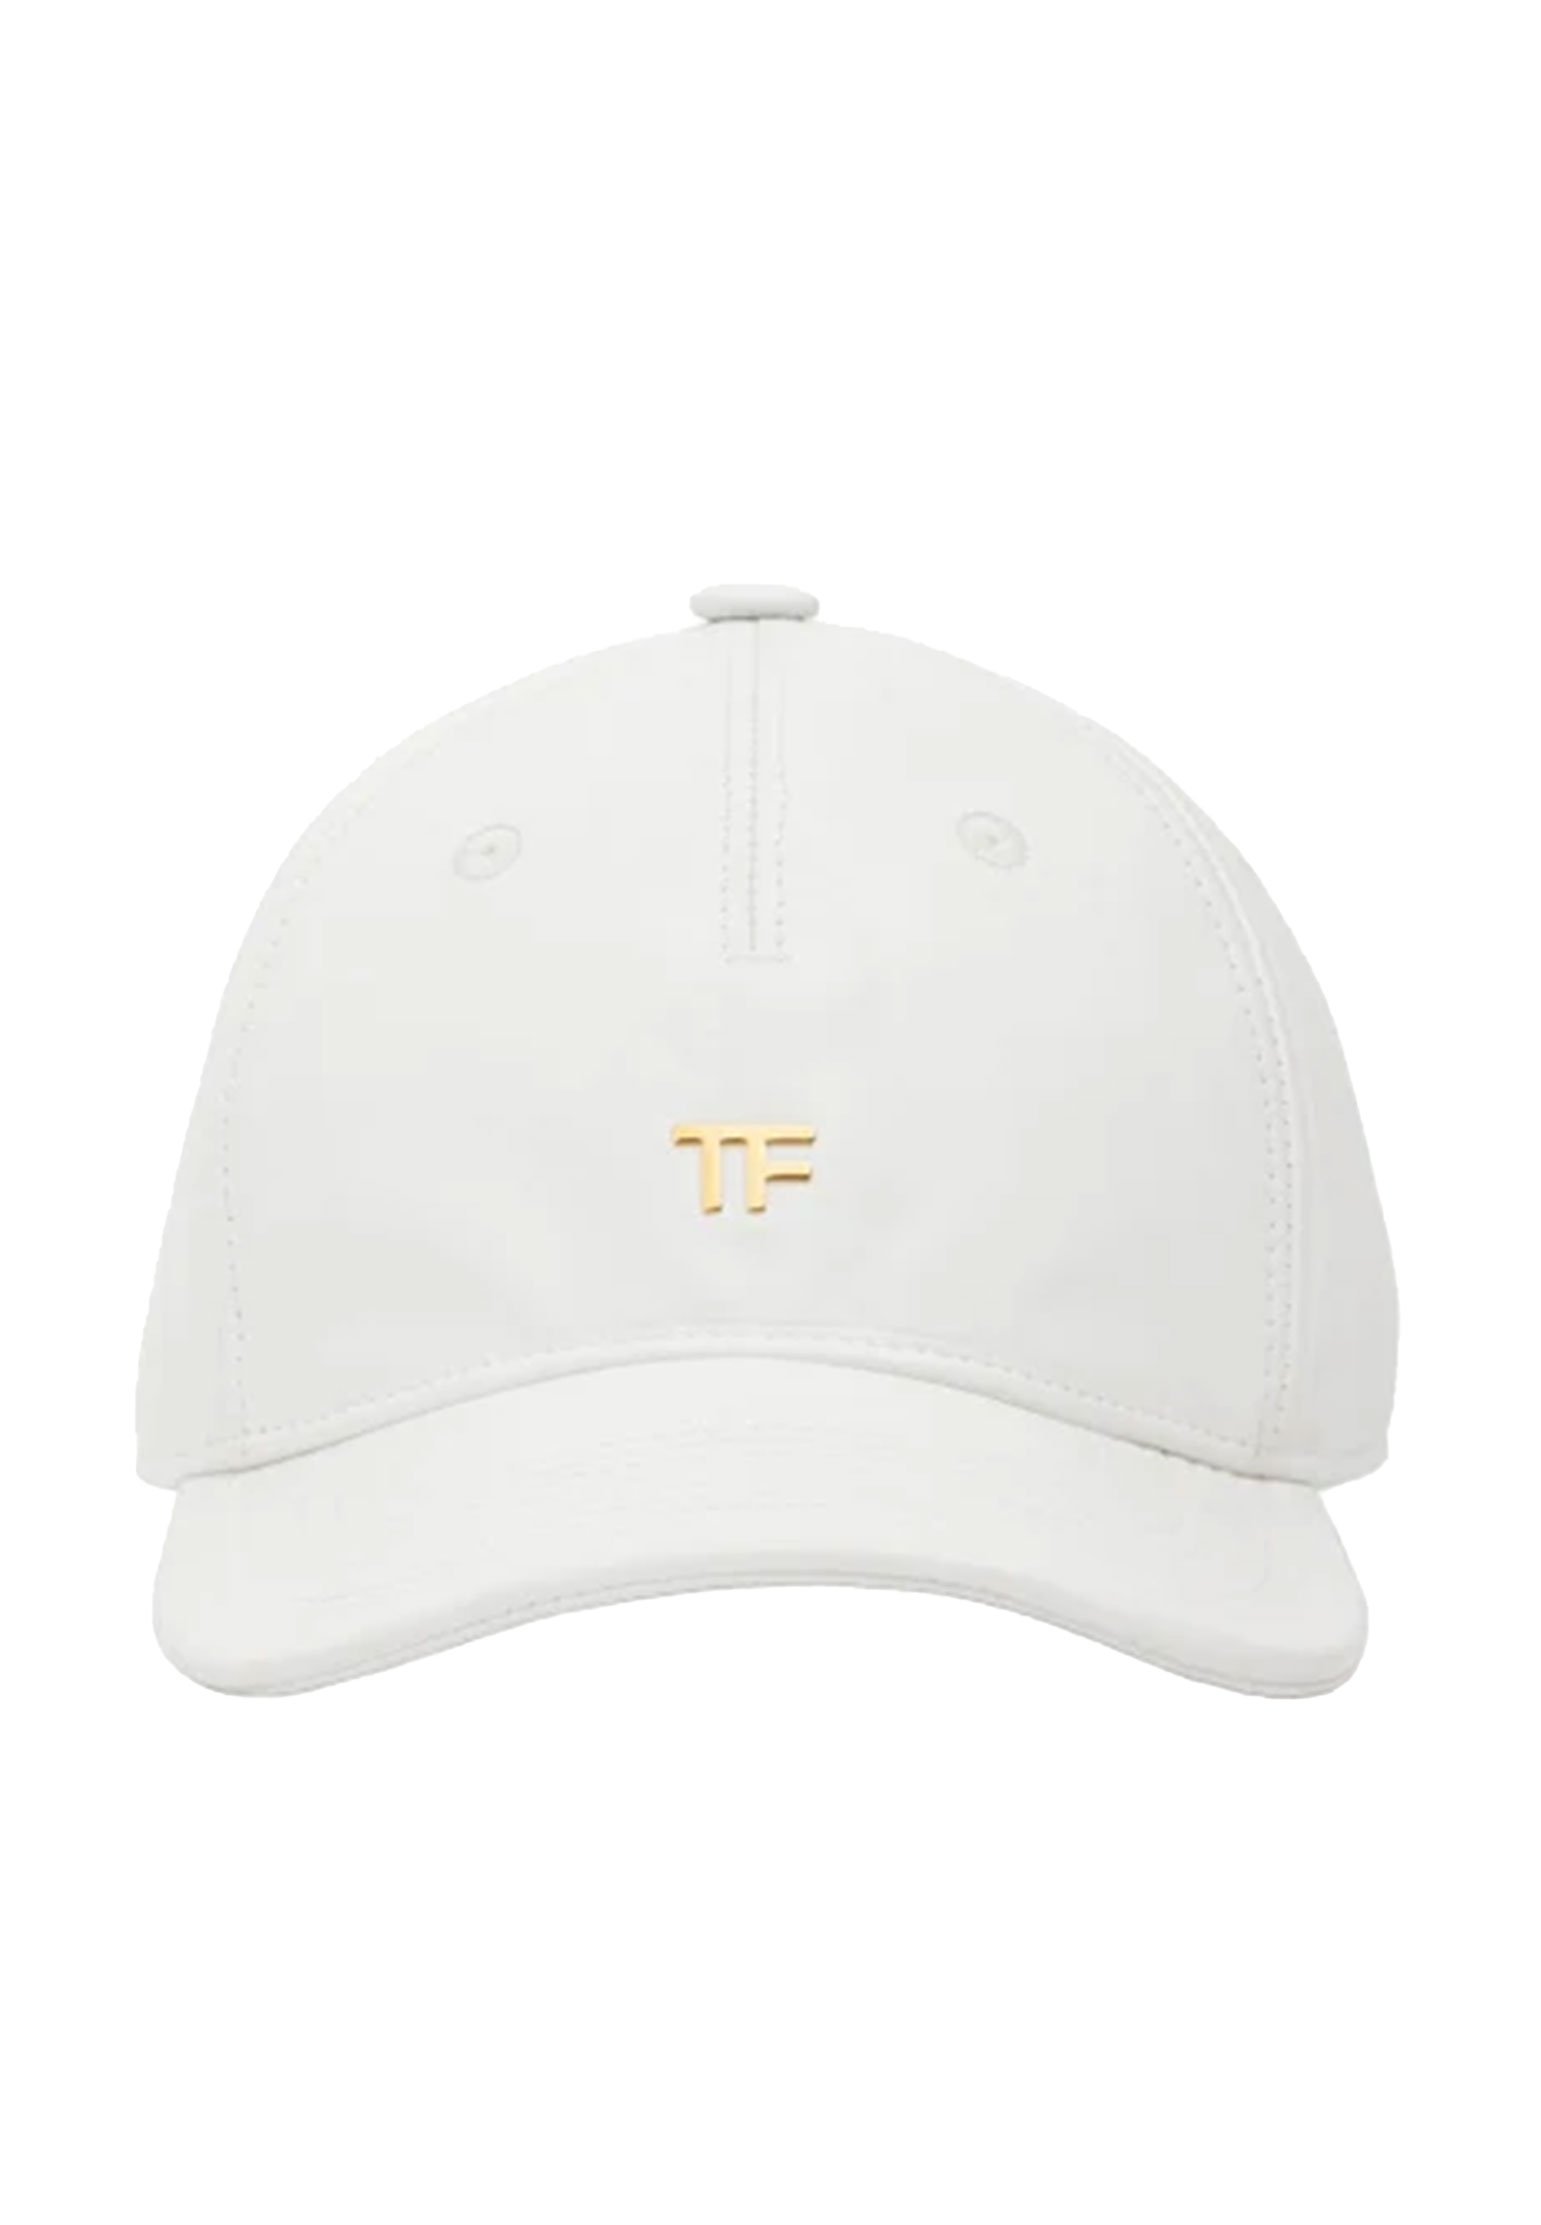 Cap TOM FORD Color: white (Code: 2992) in online store Allure